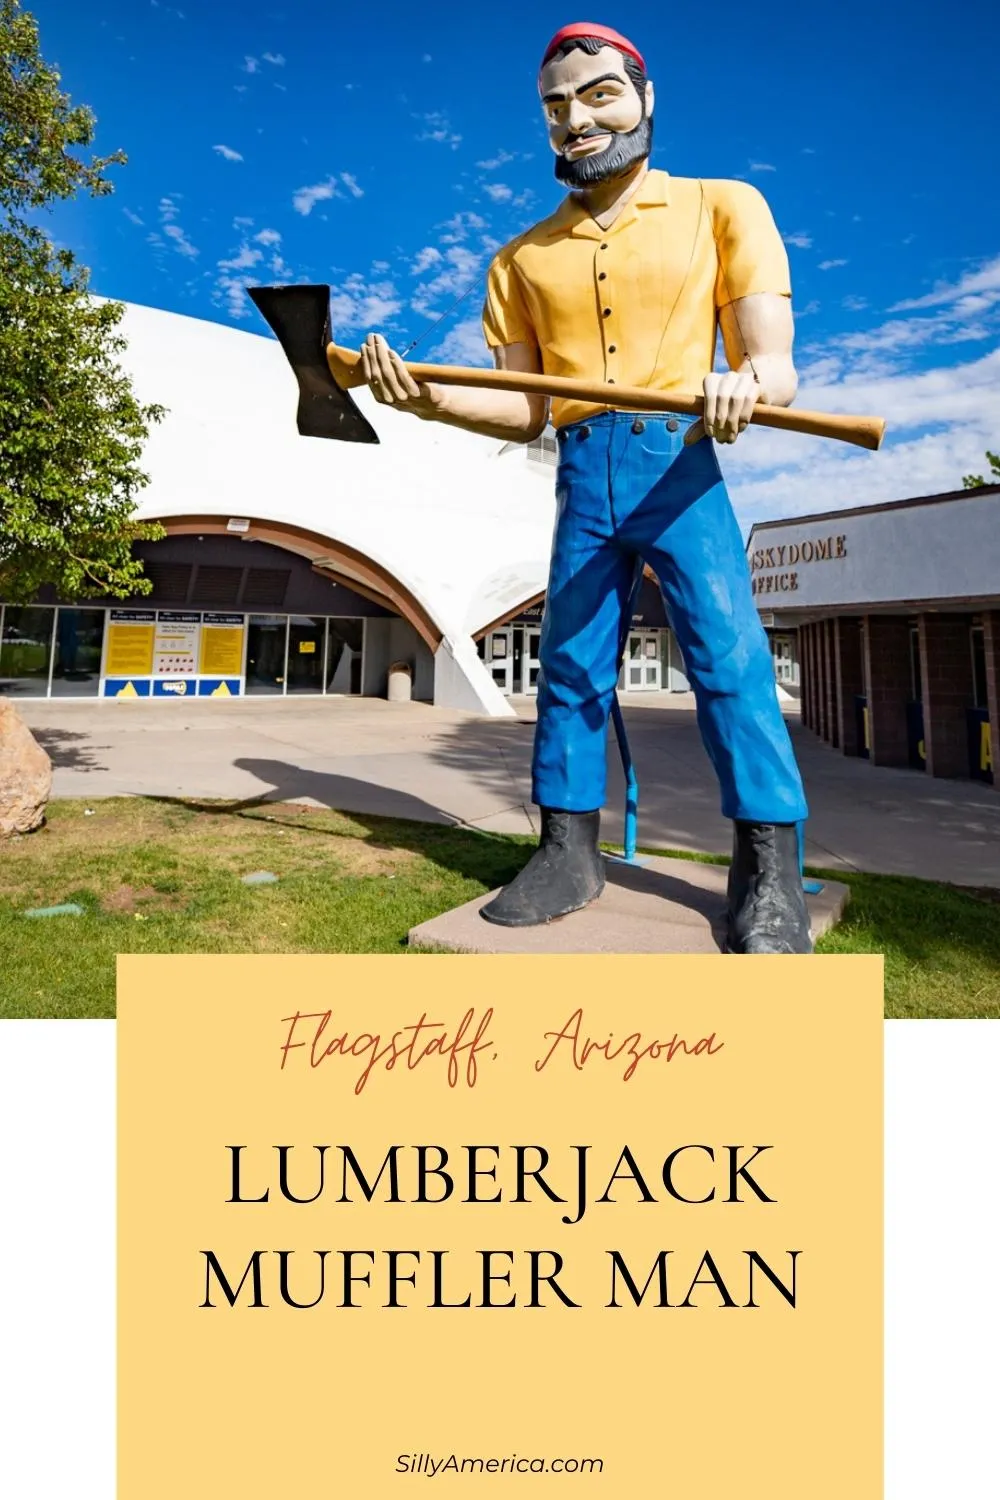 While thousands of fans visit the J. Lawrence Walkup Skydome each year to cheer on the Northern Arizona Lumberjacks, I was there to see just one Lumberjack in particular. Louie the Lumberjack, the Skydome Lumberjack Muffler Man and historic Route 66 icon in Flagstaff, Arizona. It is thought to be the very first muffler man roadside attraction in America! Visit this famous roadside attraction on a Route 66 road trip to Arizona! #RoadTrip #ArizonaRoadTrip #MufflerMan #Route66 #Route66RoadTrip